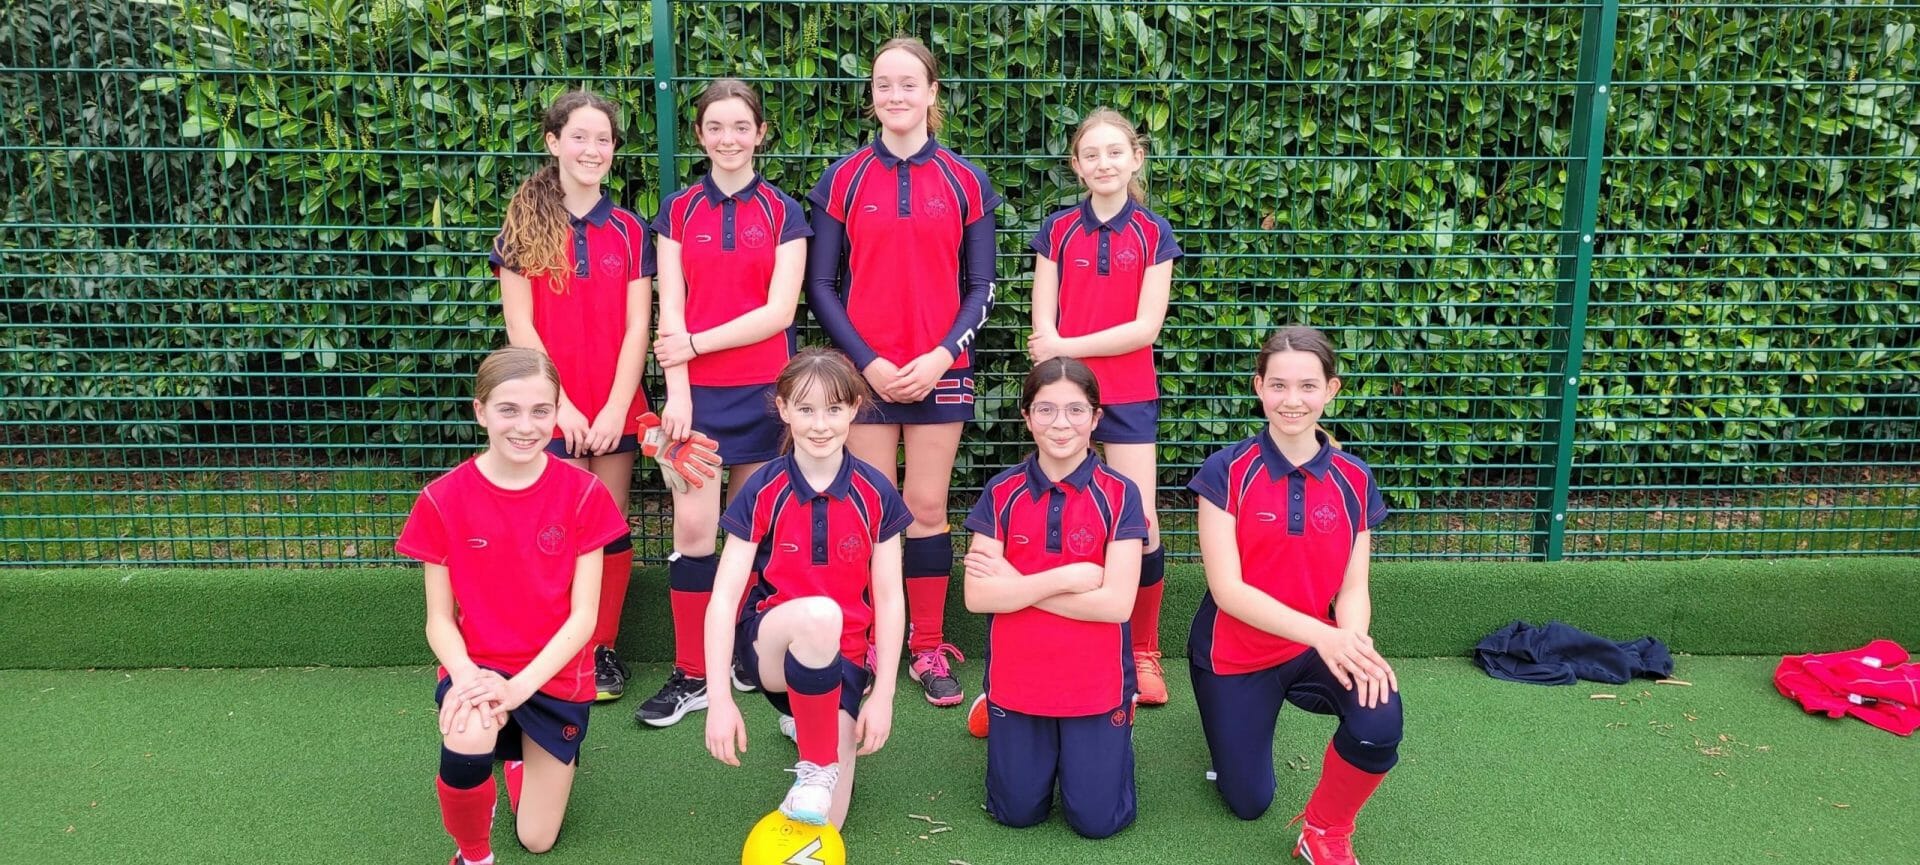 Match Report: Year 7 and Year 8 Football v Doverbroecks